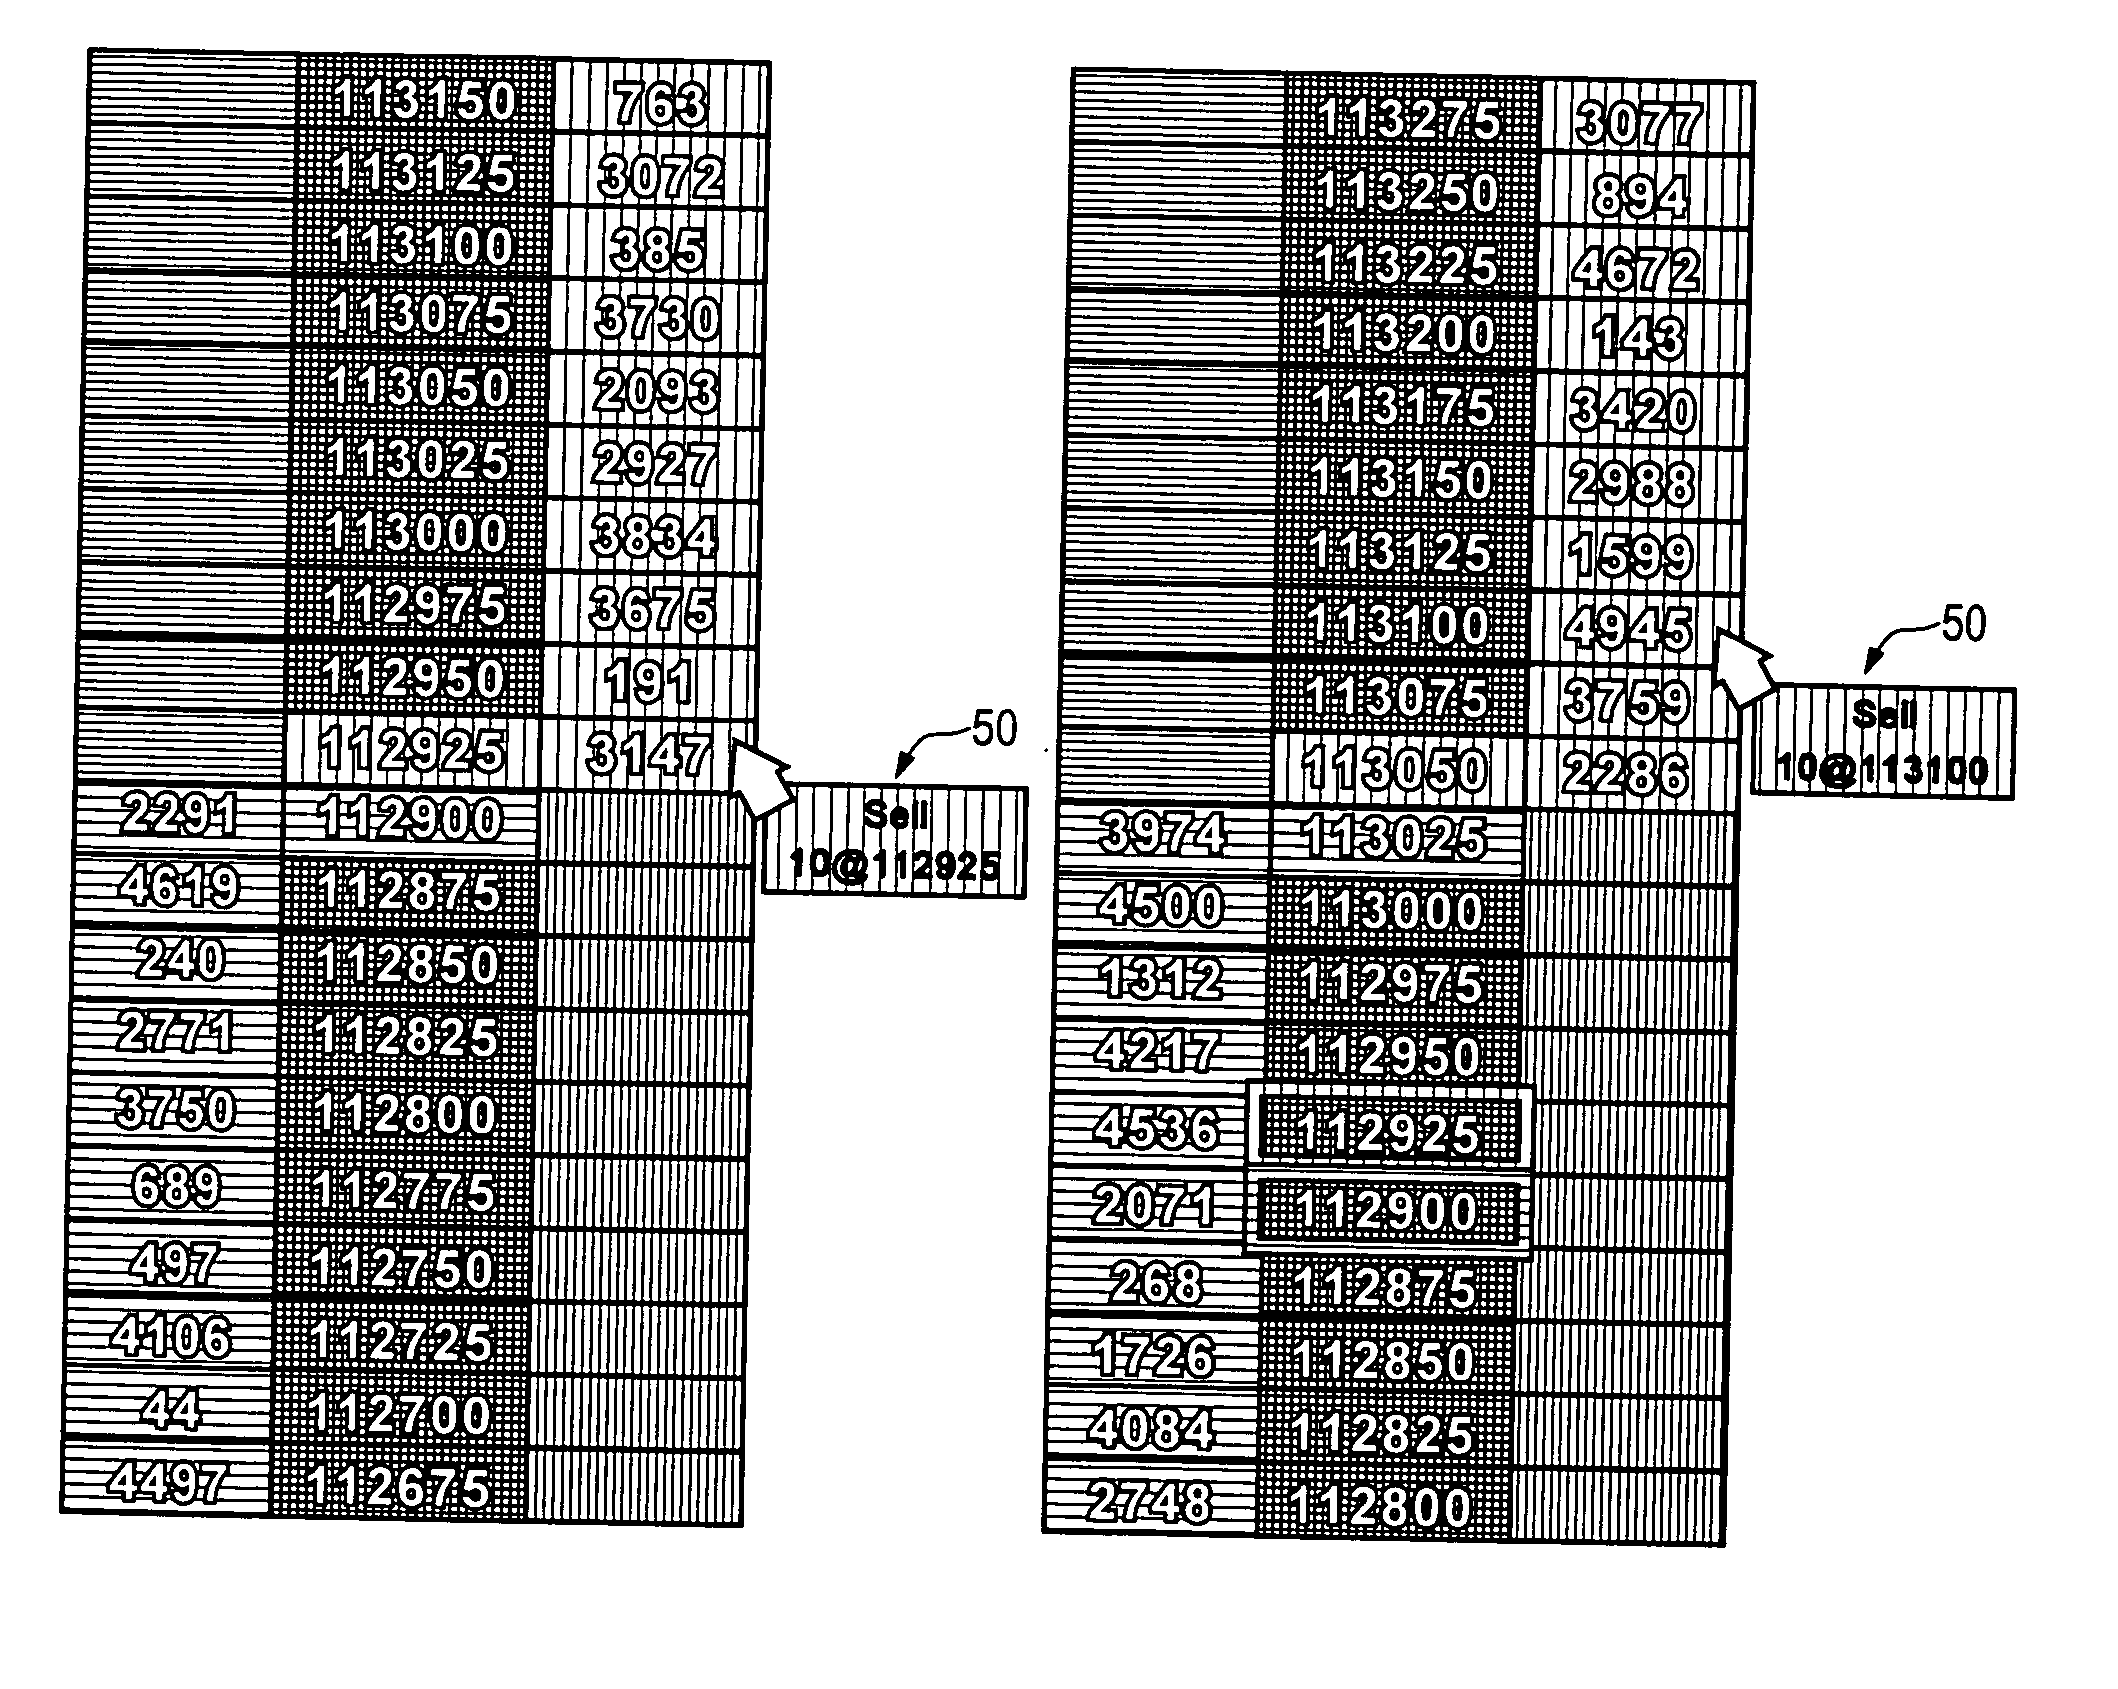 Graphical user interface and method for displaying market data and entering trading orders